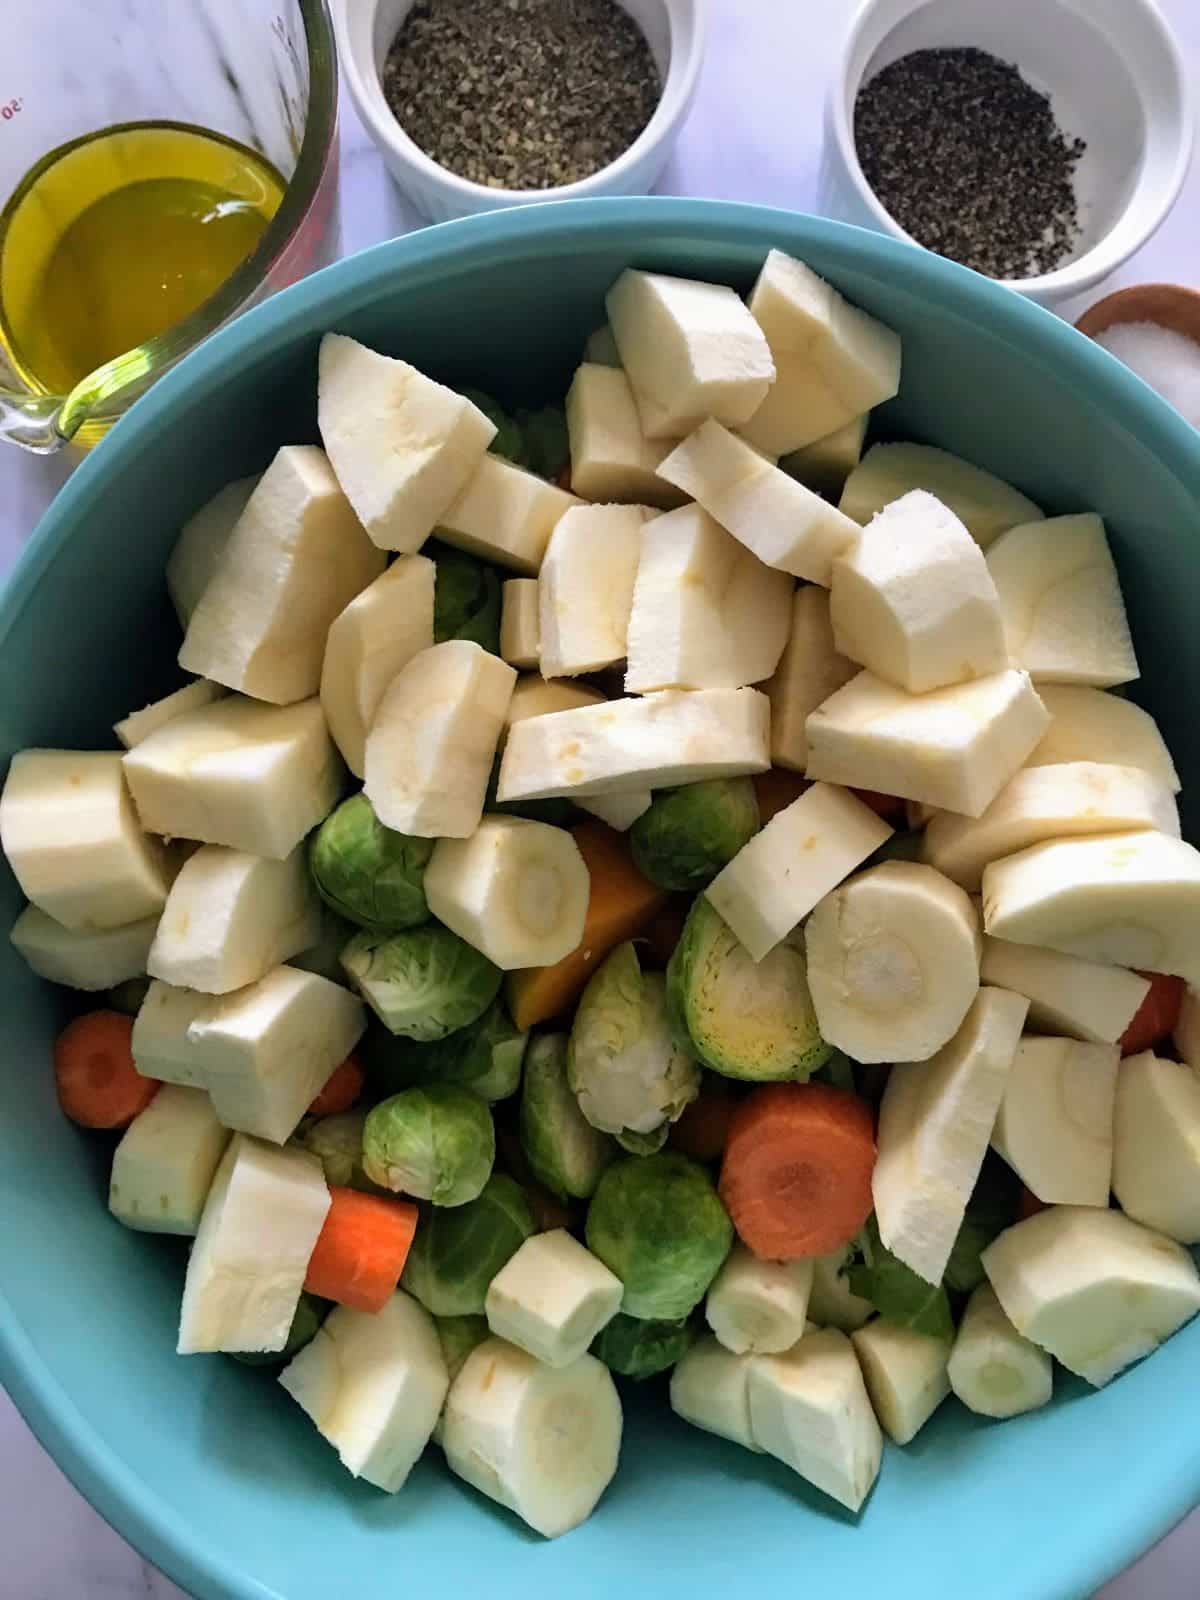 Chopped parsnips, brussels sprouts, carrots in a blue bowl to make Simple Herb-Roasted Vegetables